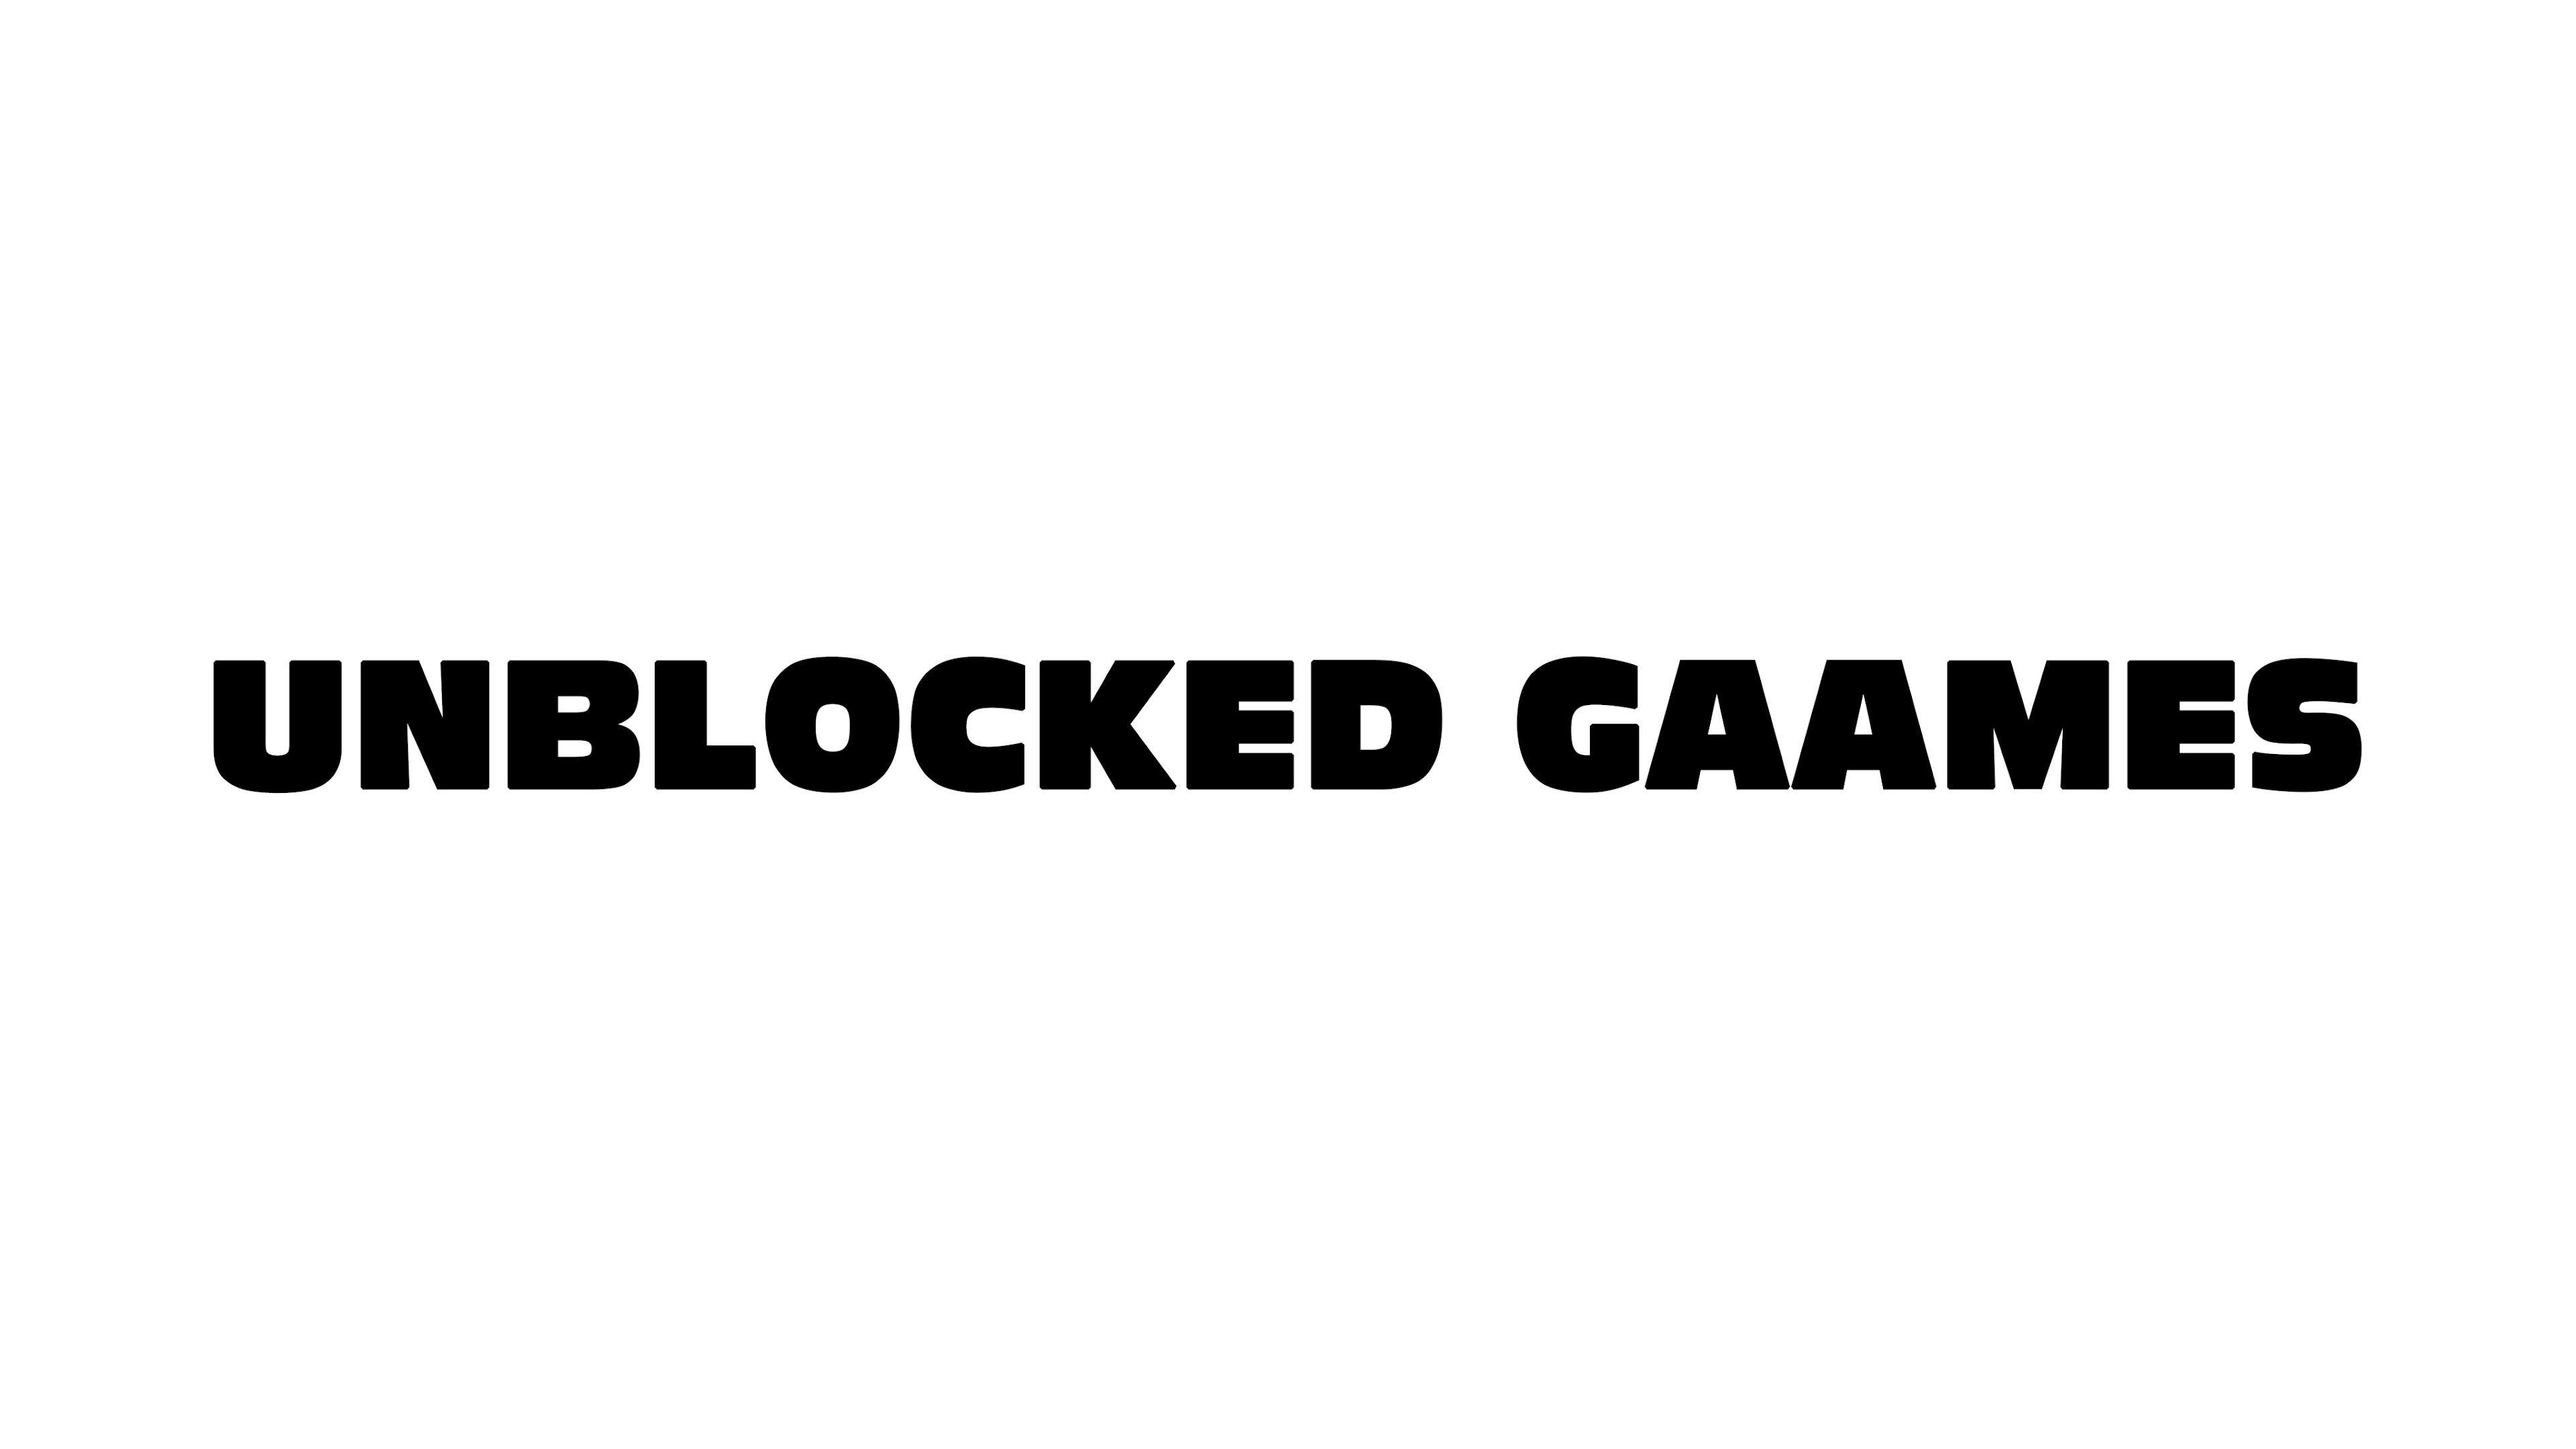 How to Play Unblocked Games Premium?